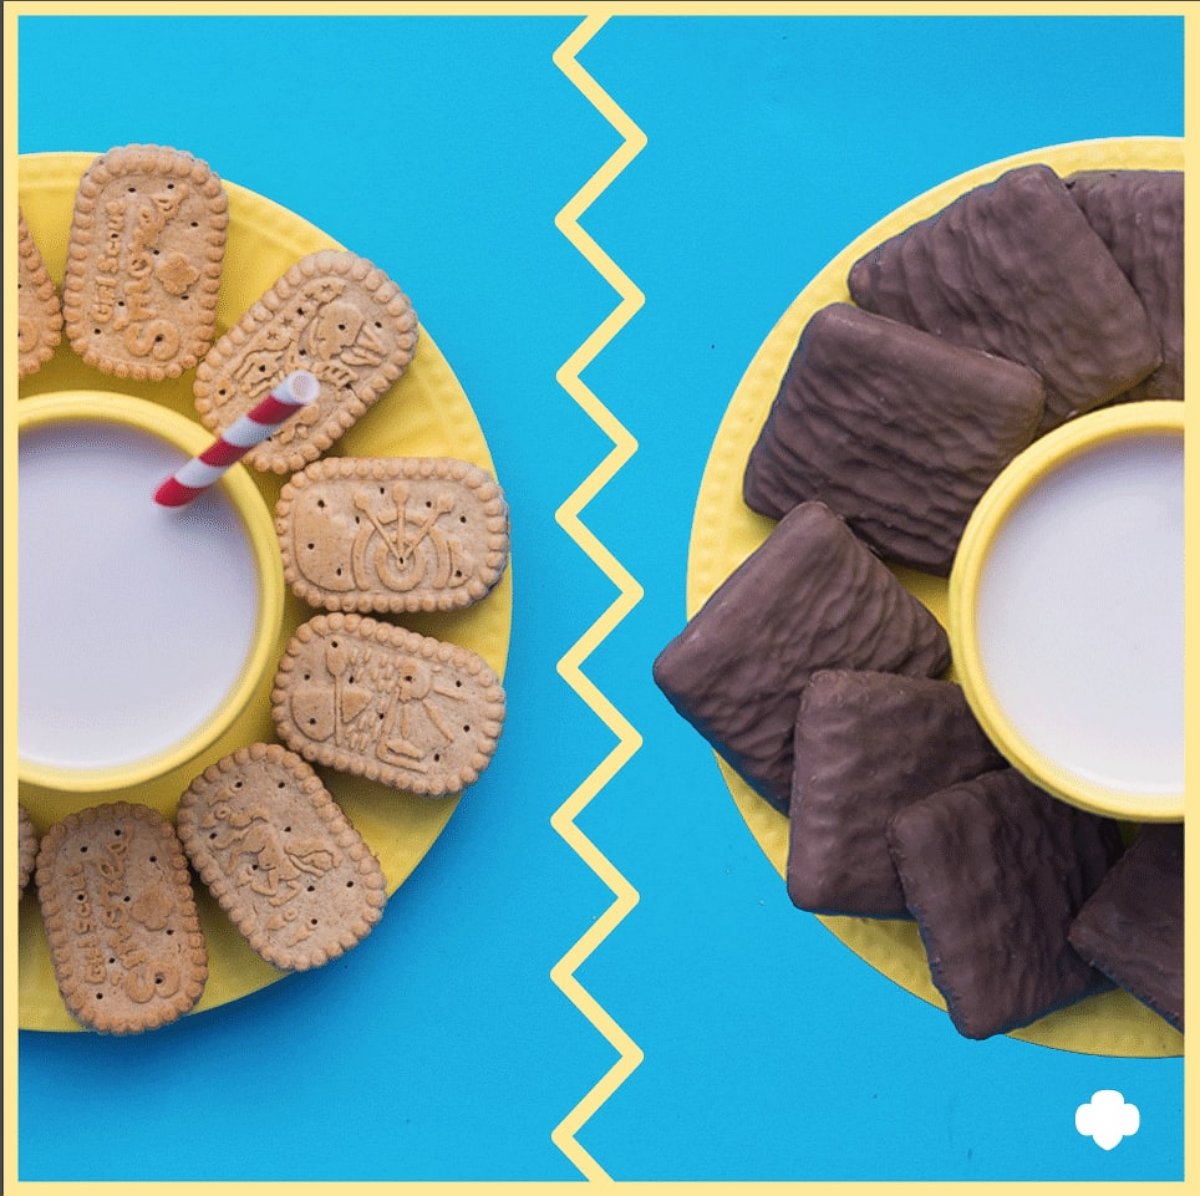 PHOTO: The Girl Scouts are adding two commemorative s'mores-inspired cookies to the 2017 lineup.